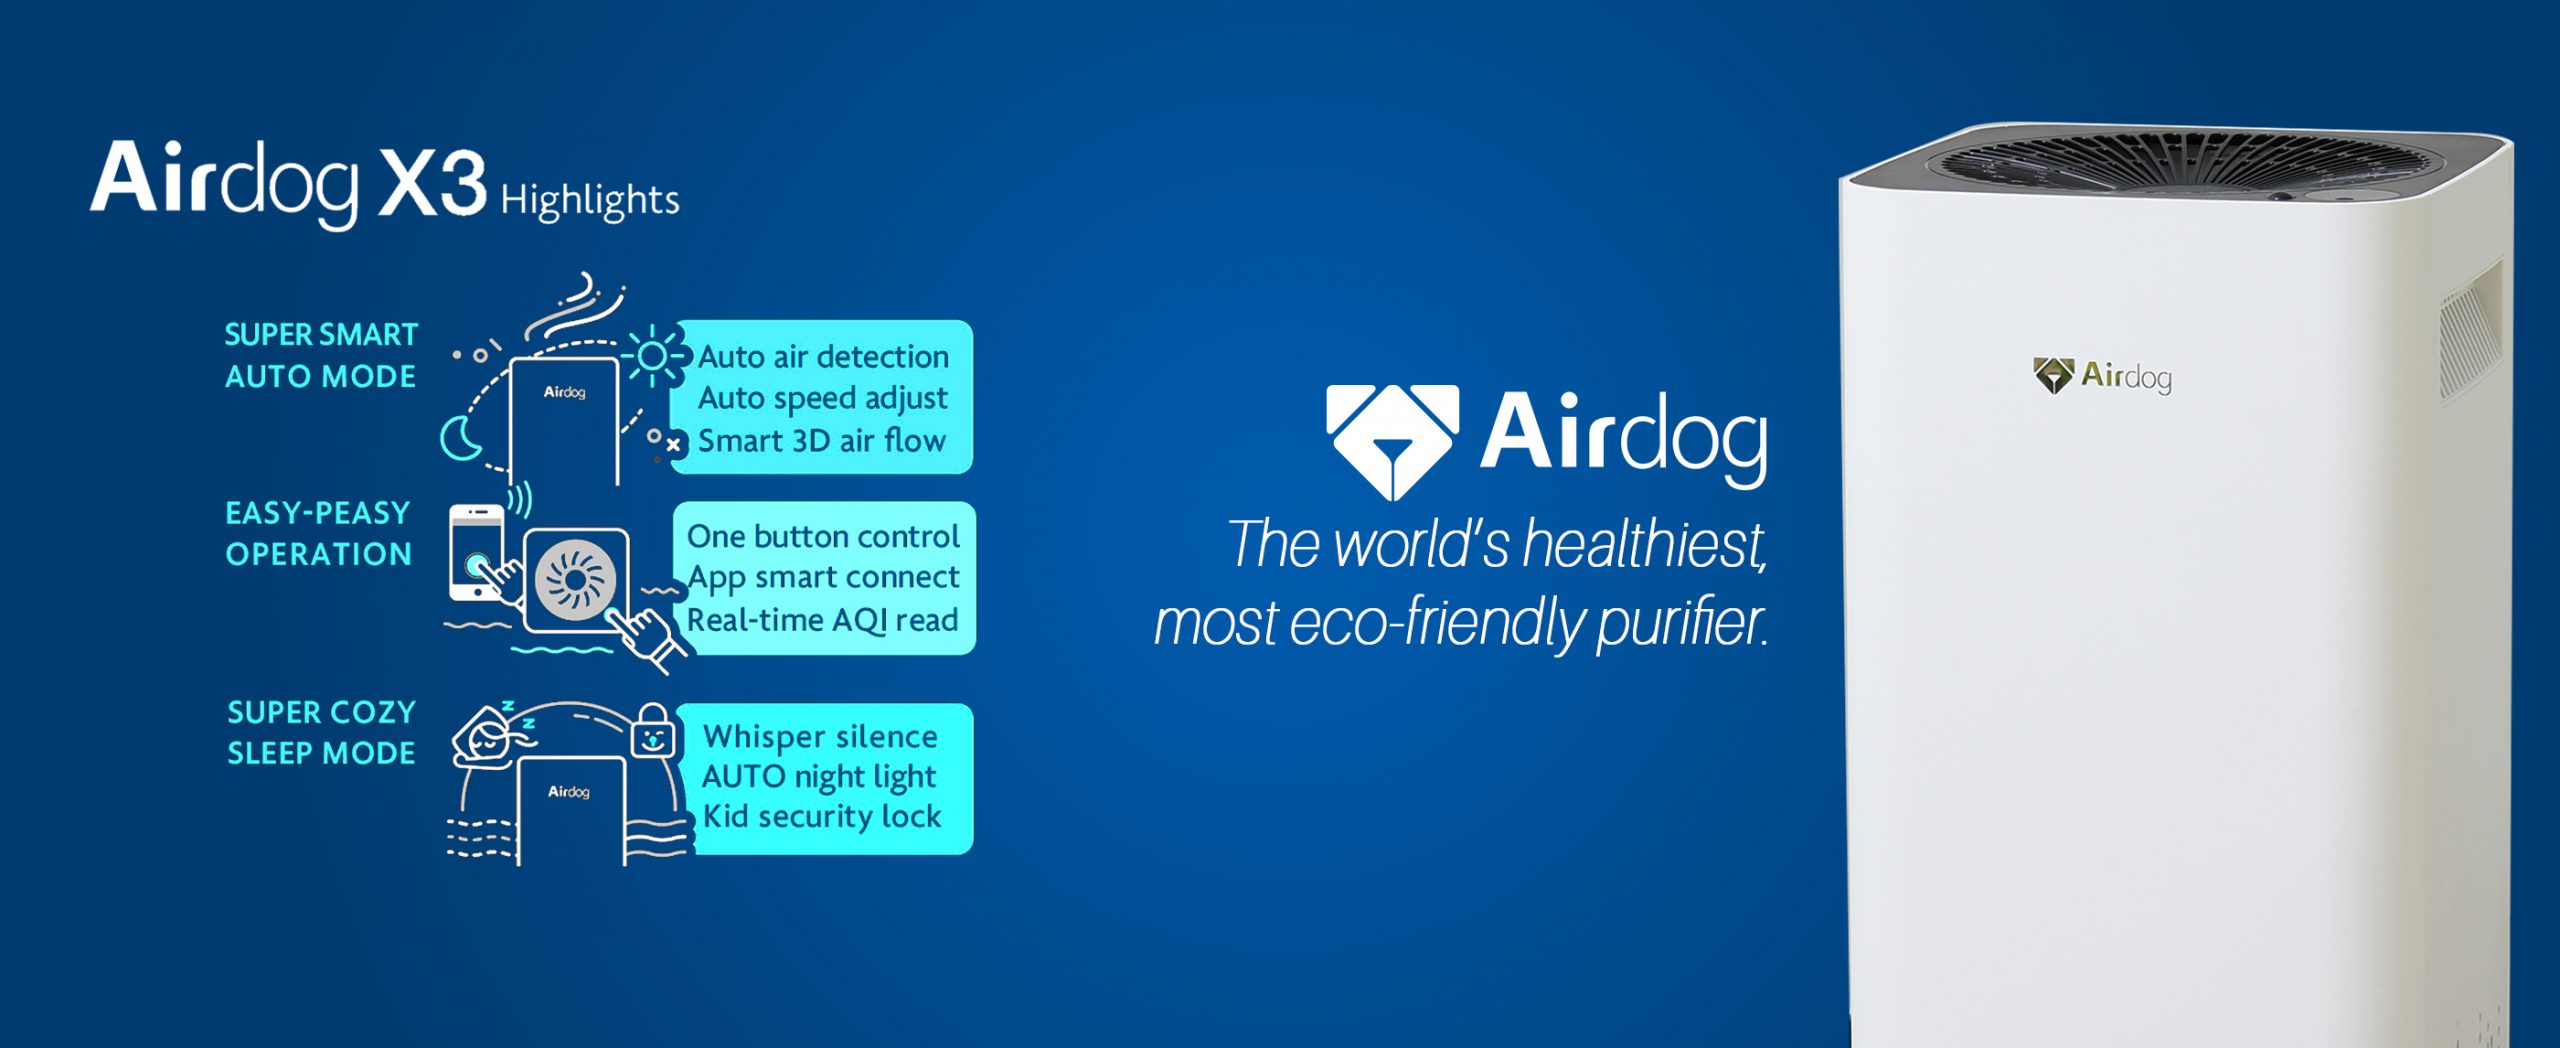 AIRDOG KEEPS YOU SAFE IN THE COVID-19 PANDEMIC.